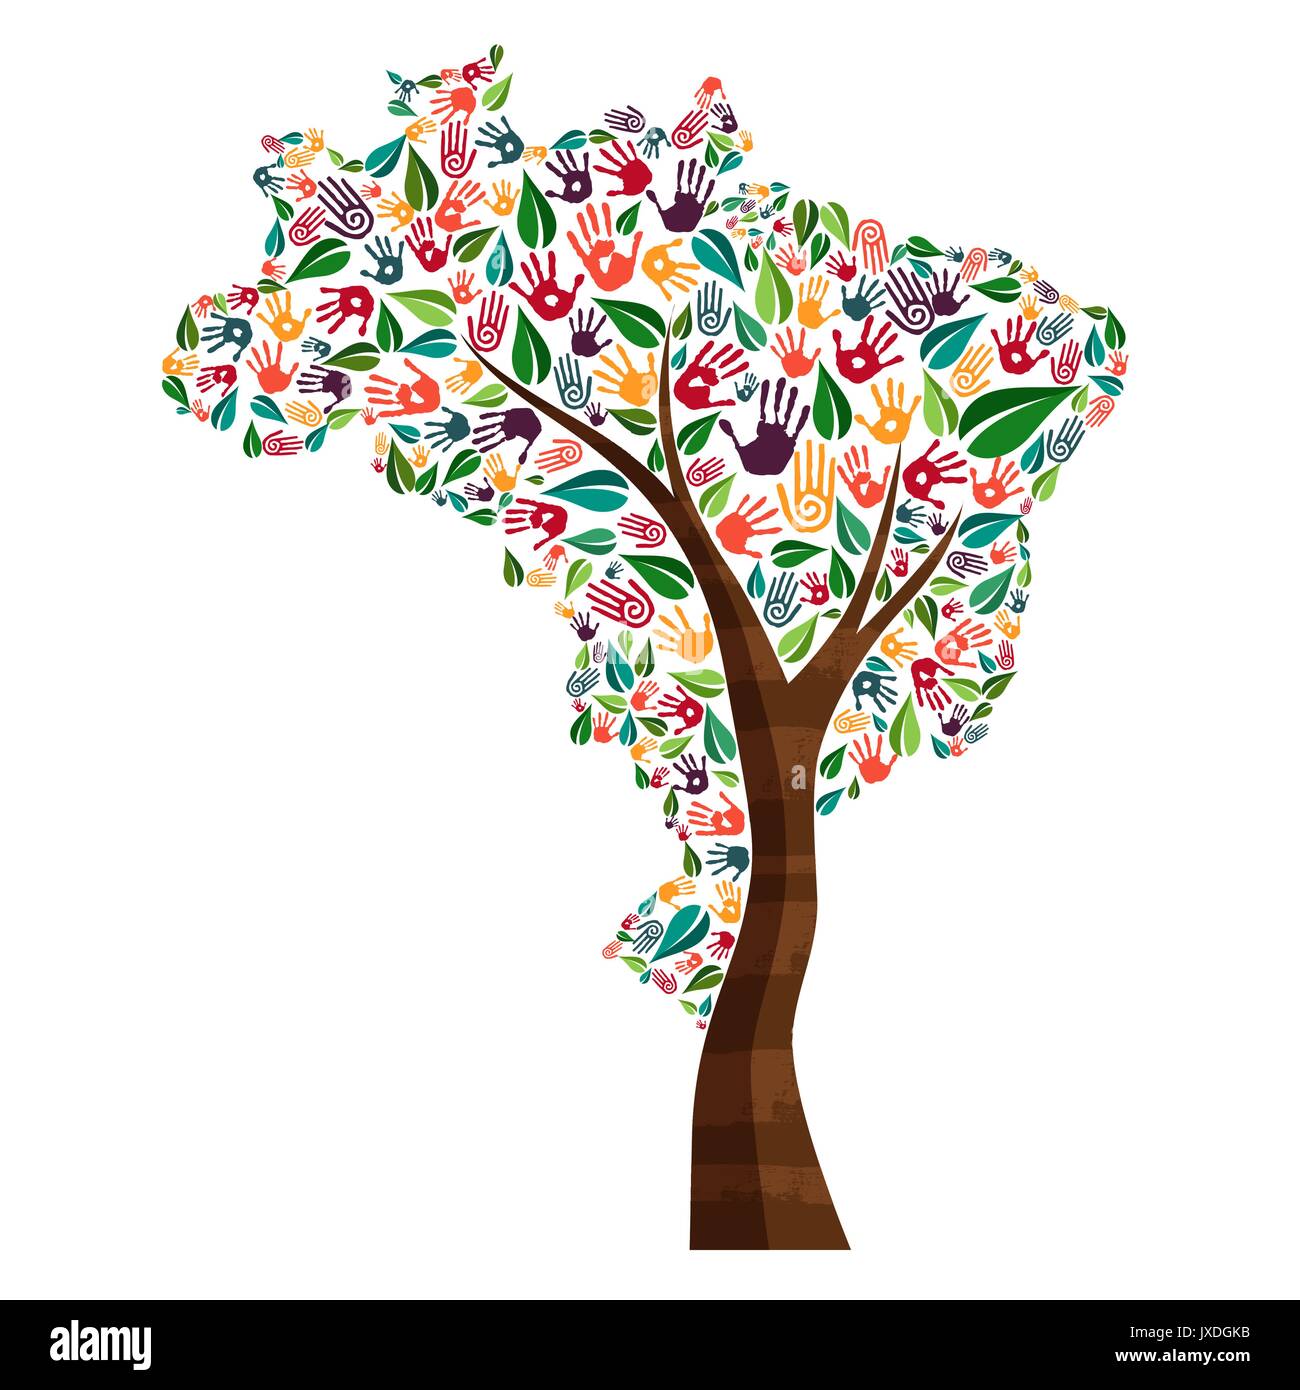 Tree with brazilian country shape and human hand prints. Brazil world help concept illustration for charity work, environment care or social project.  Stock Vector